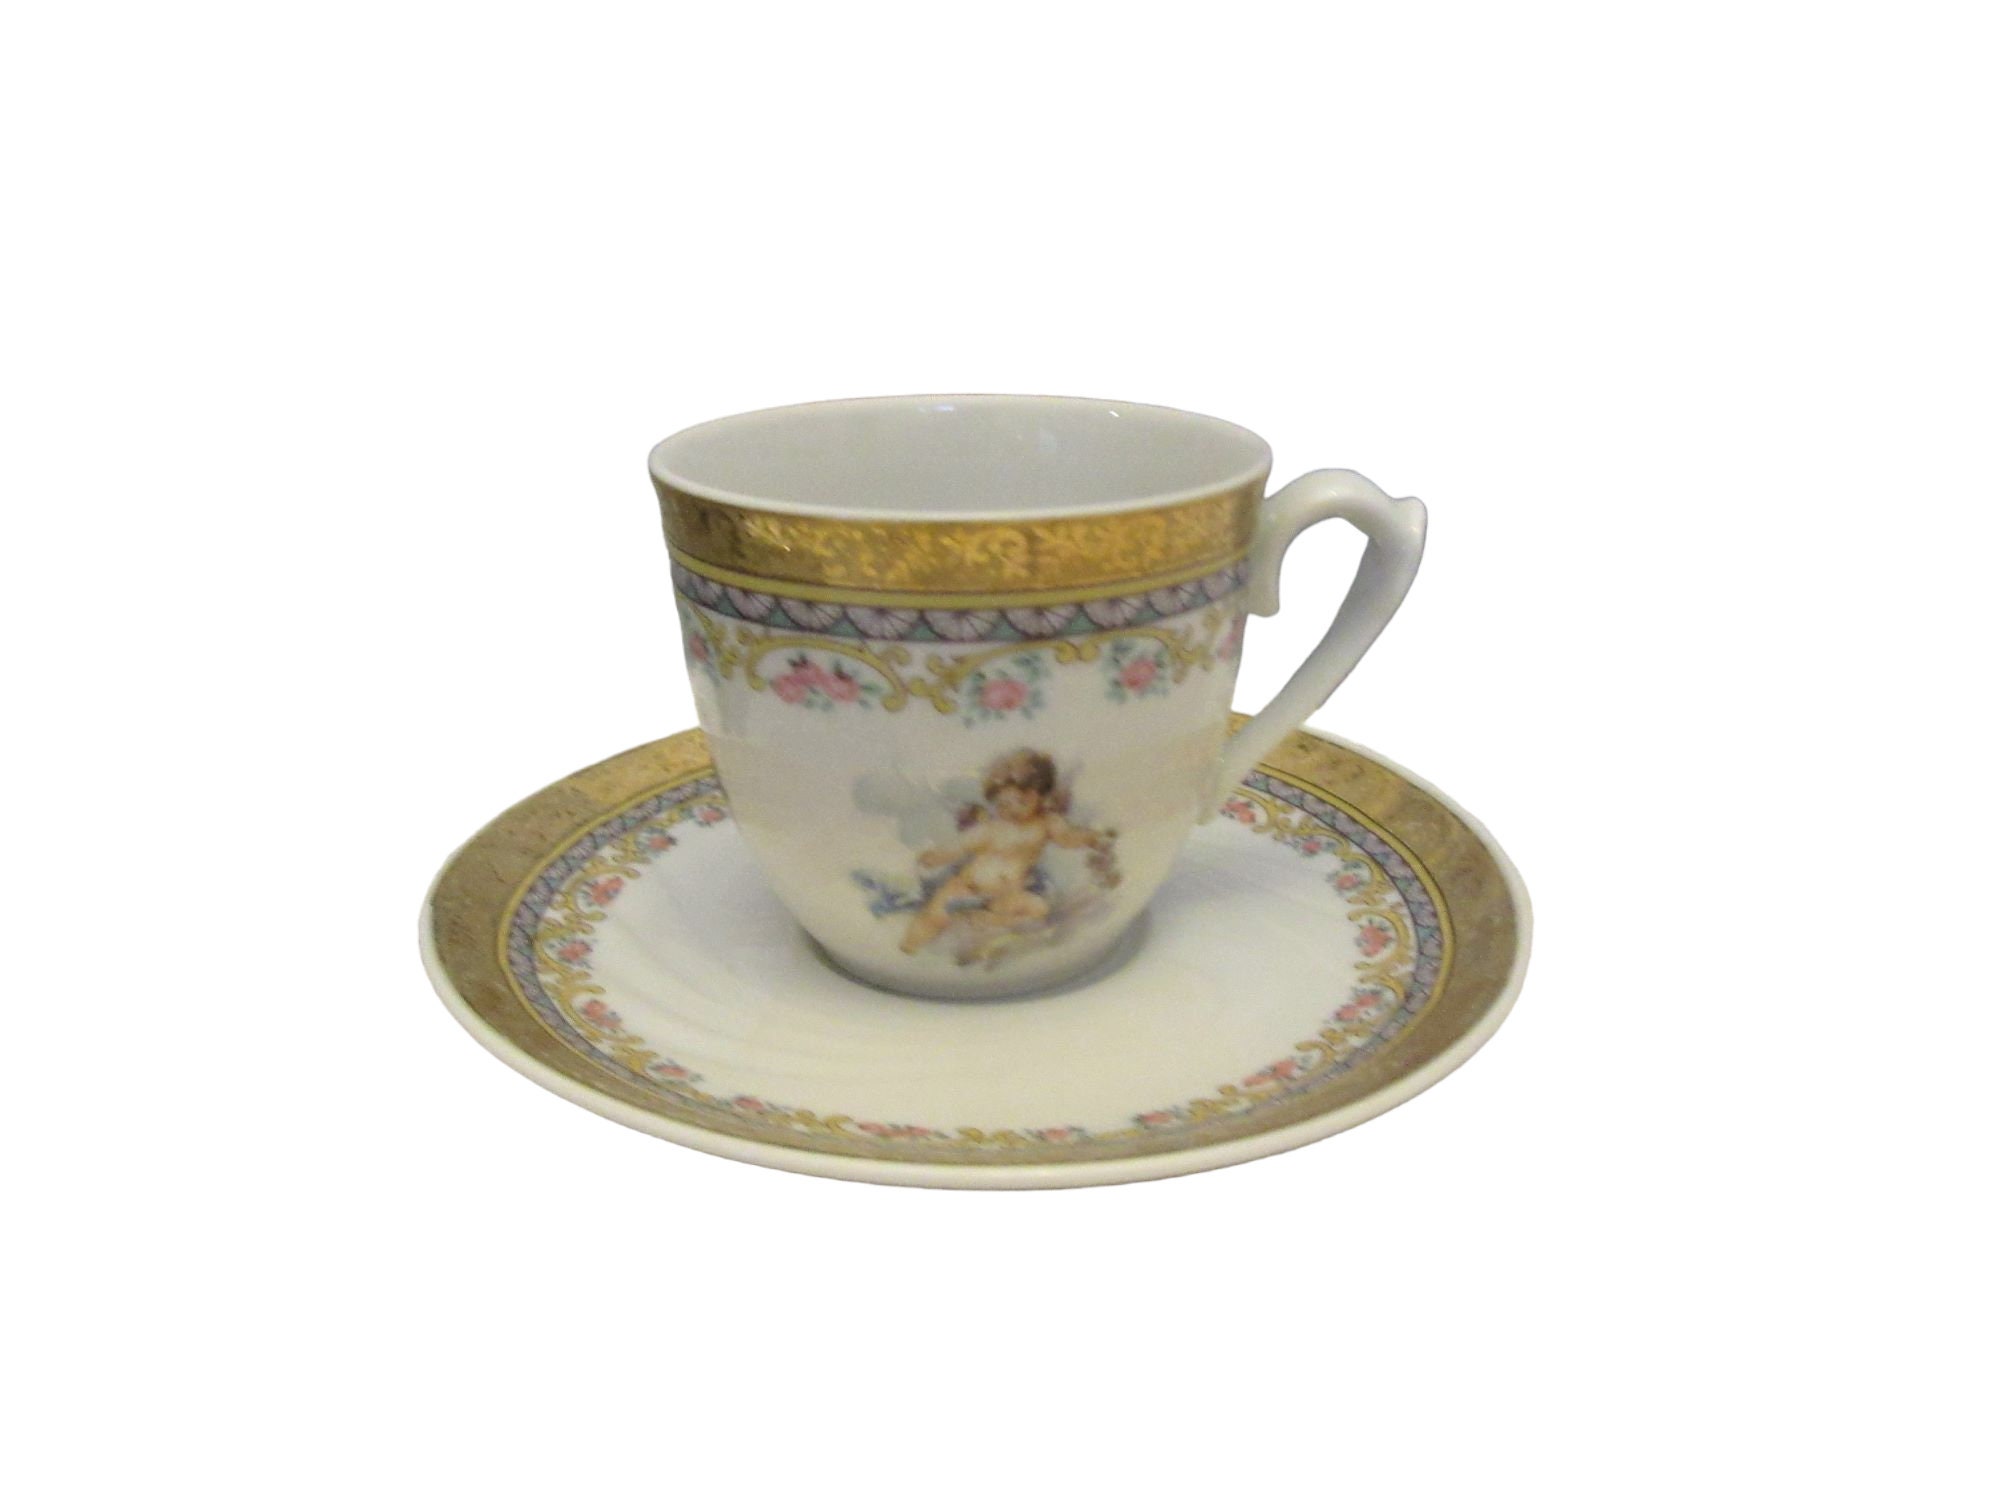 BUCCELLATI Set of Two Porcelain Coffee Cups for Men